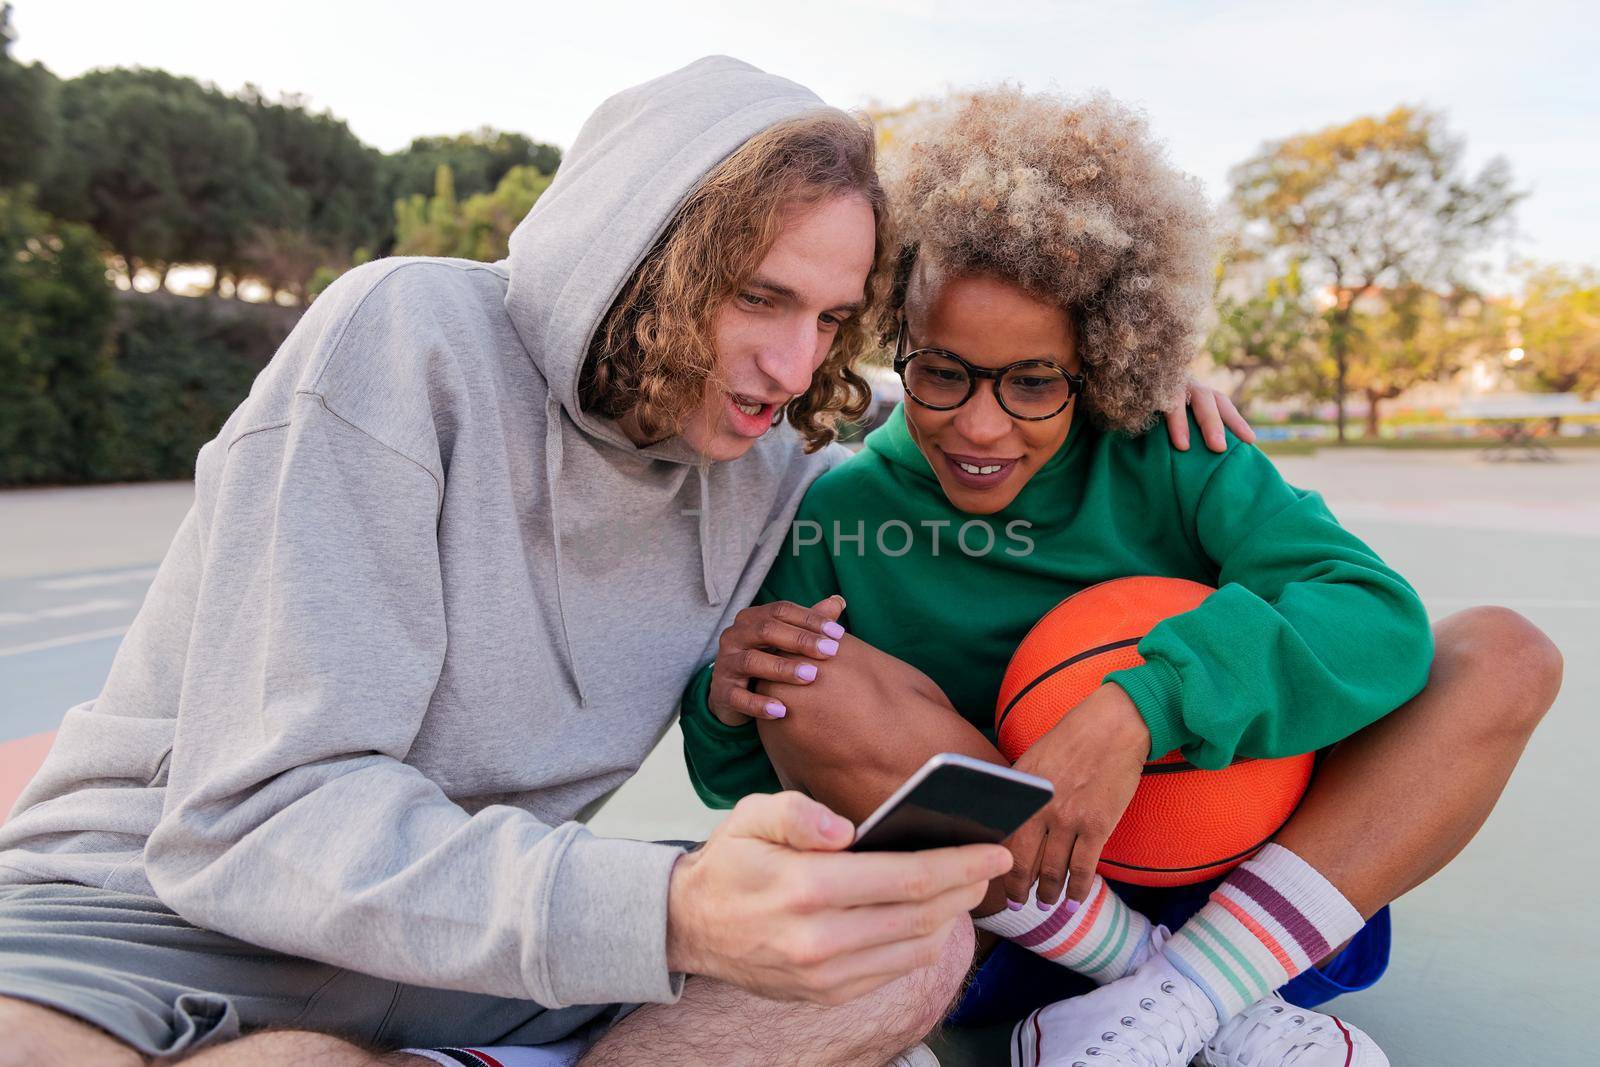 man and woman have a good time looking at things on the cell phone while sitting after basketball practice in a city park, concept of friendship and urban sport in the street